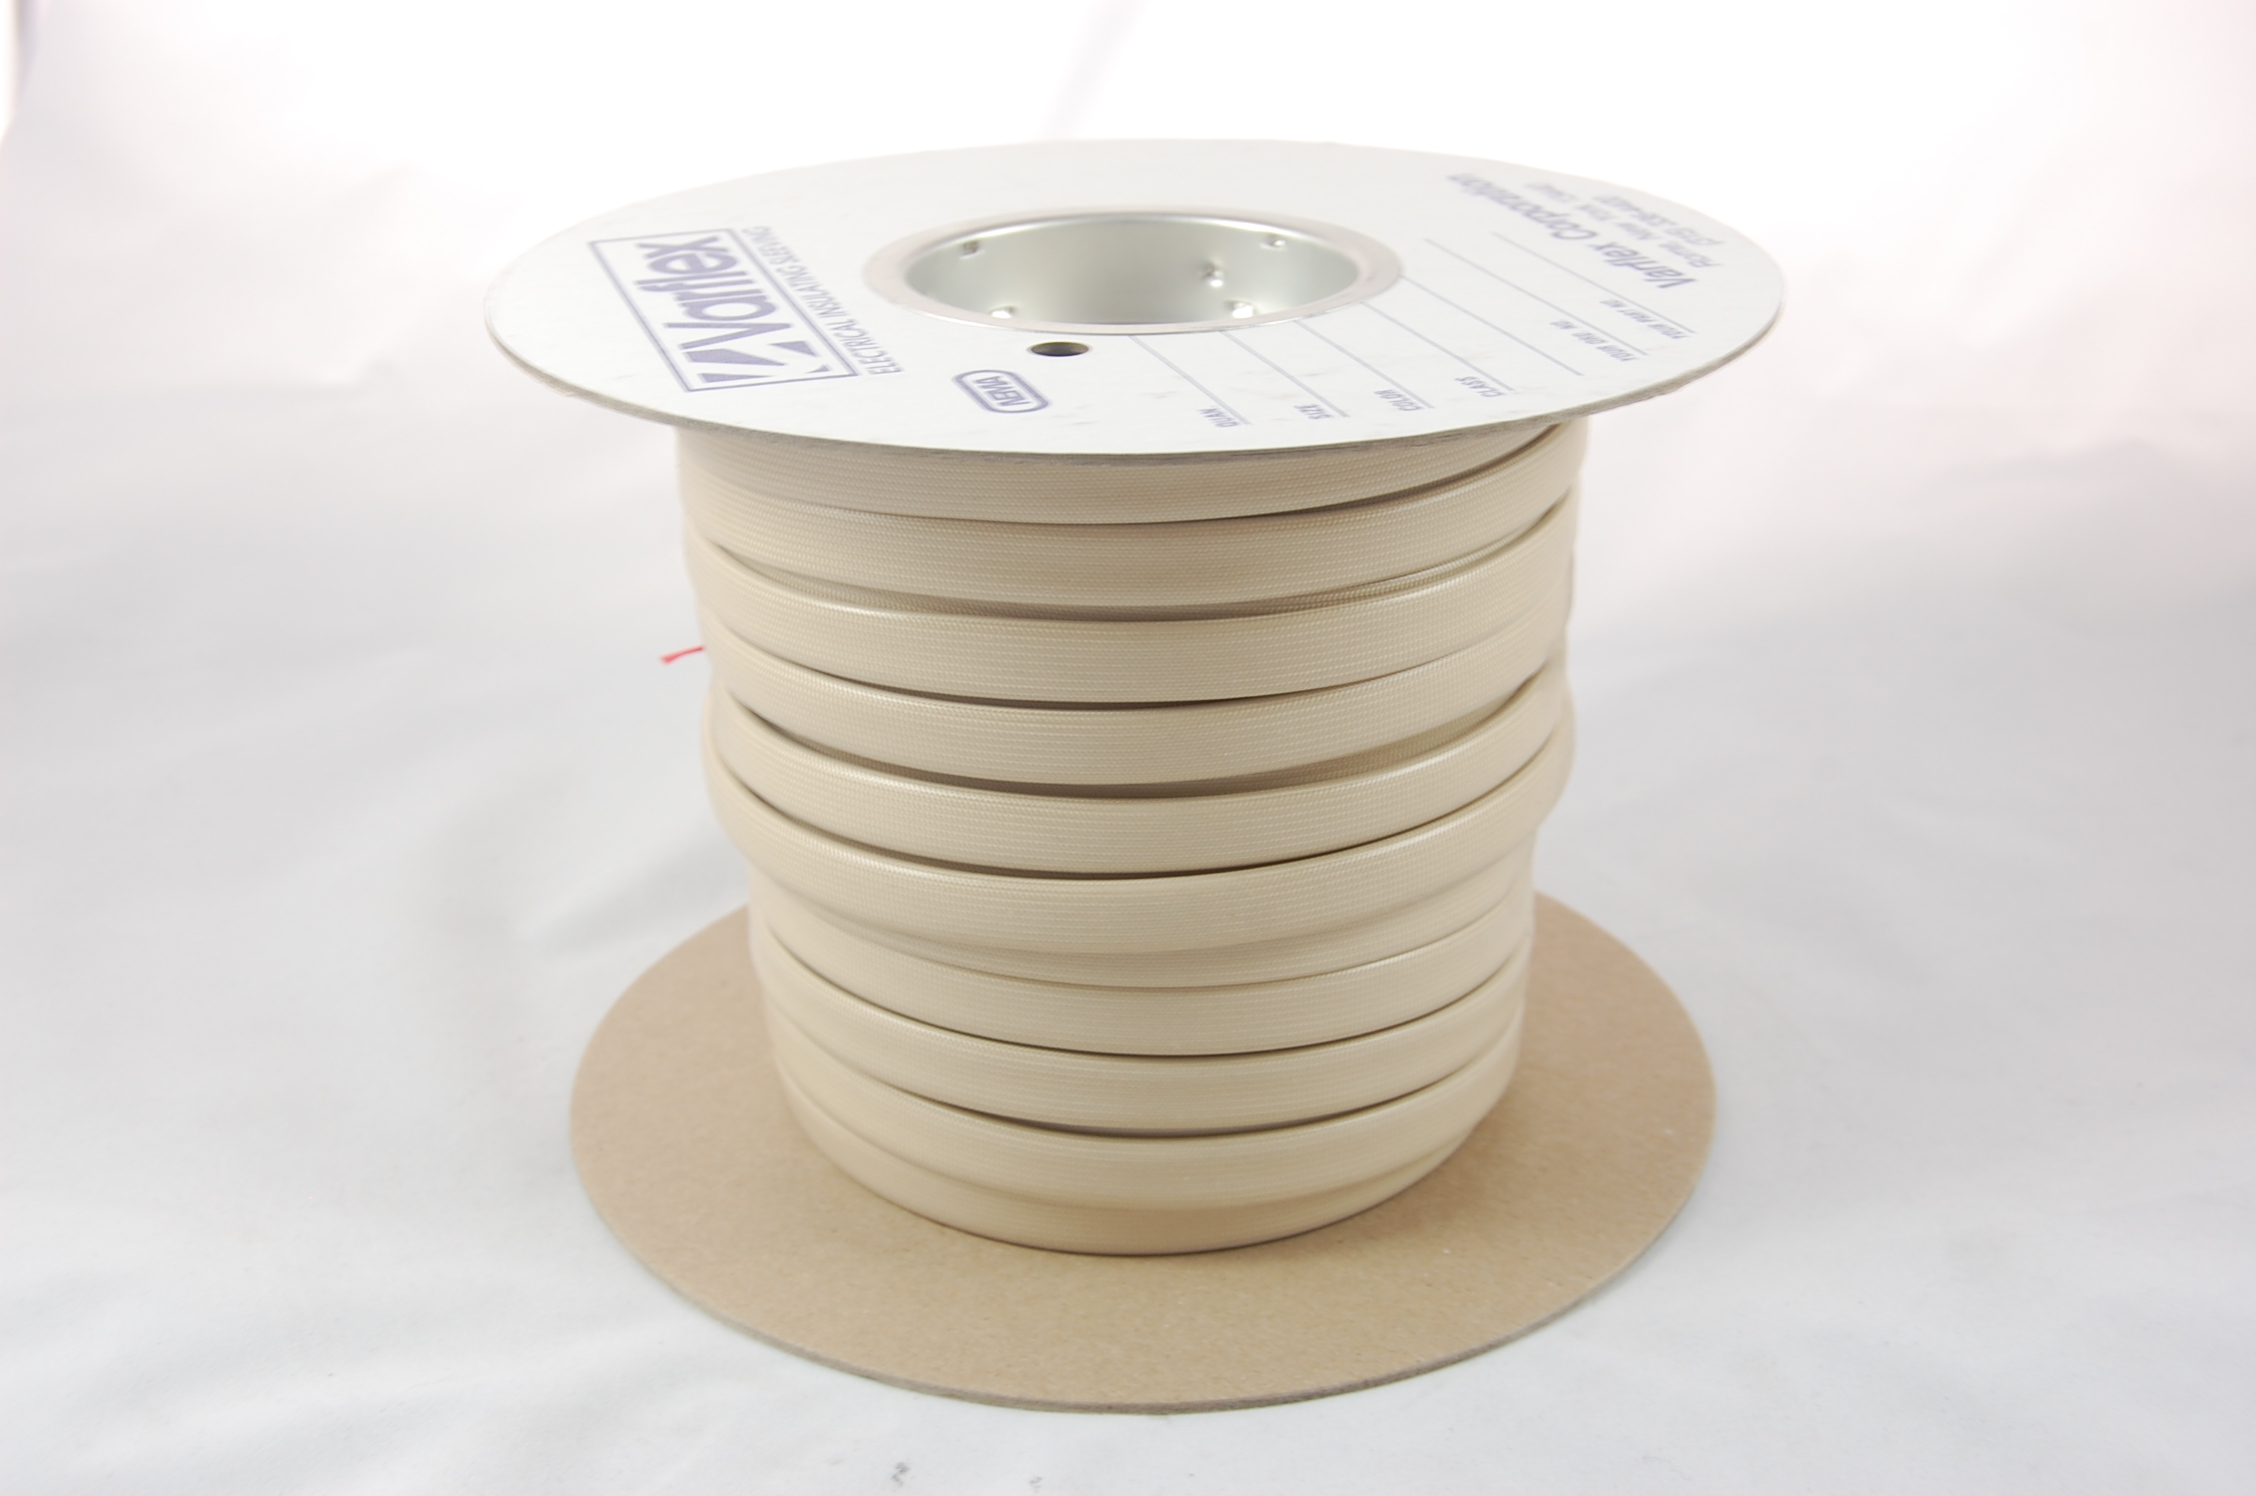 #2 AWG Varglas Silicone Rubber Grade H-C-1 (2500V) High Temperature Silicone Rubber Coated Braided Fiberglass Sleeving 200°C, natural, 150 FT per spool